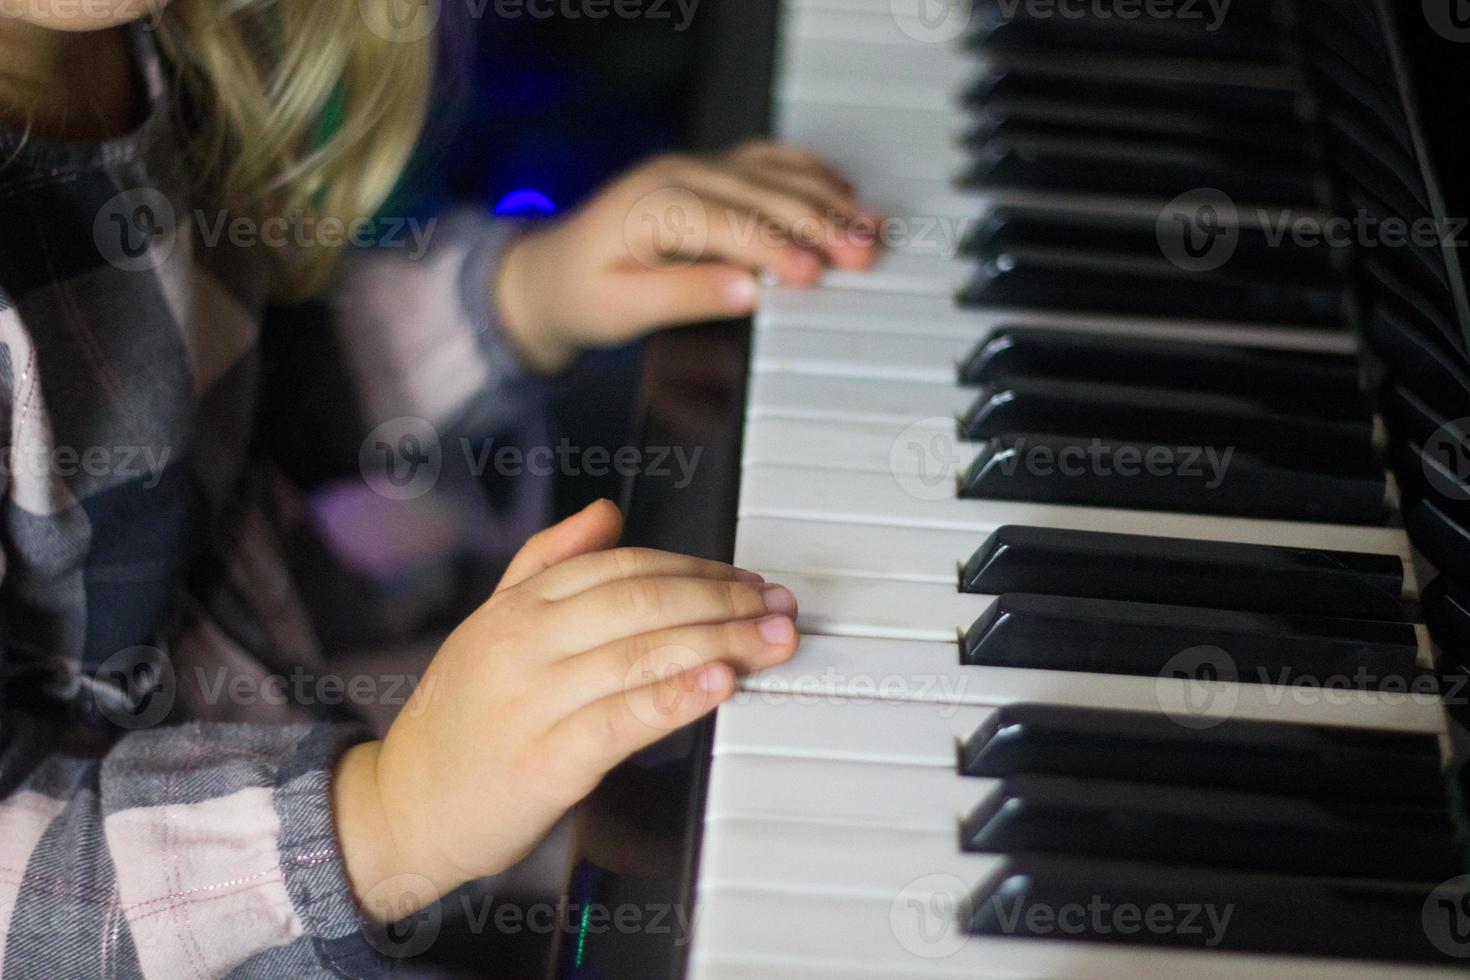 Little girl play piano,kids hands on piano keyboard close up,homeschooling,musical education.Growing talented child.Daily routine for toddler,side view of childs hands and piano. photo